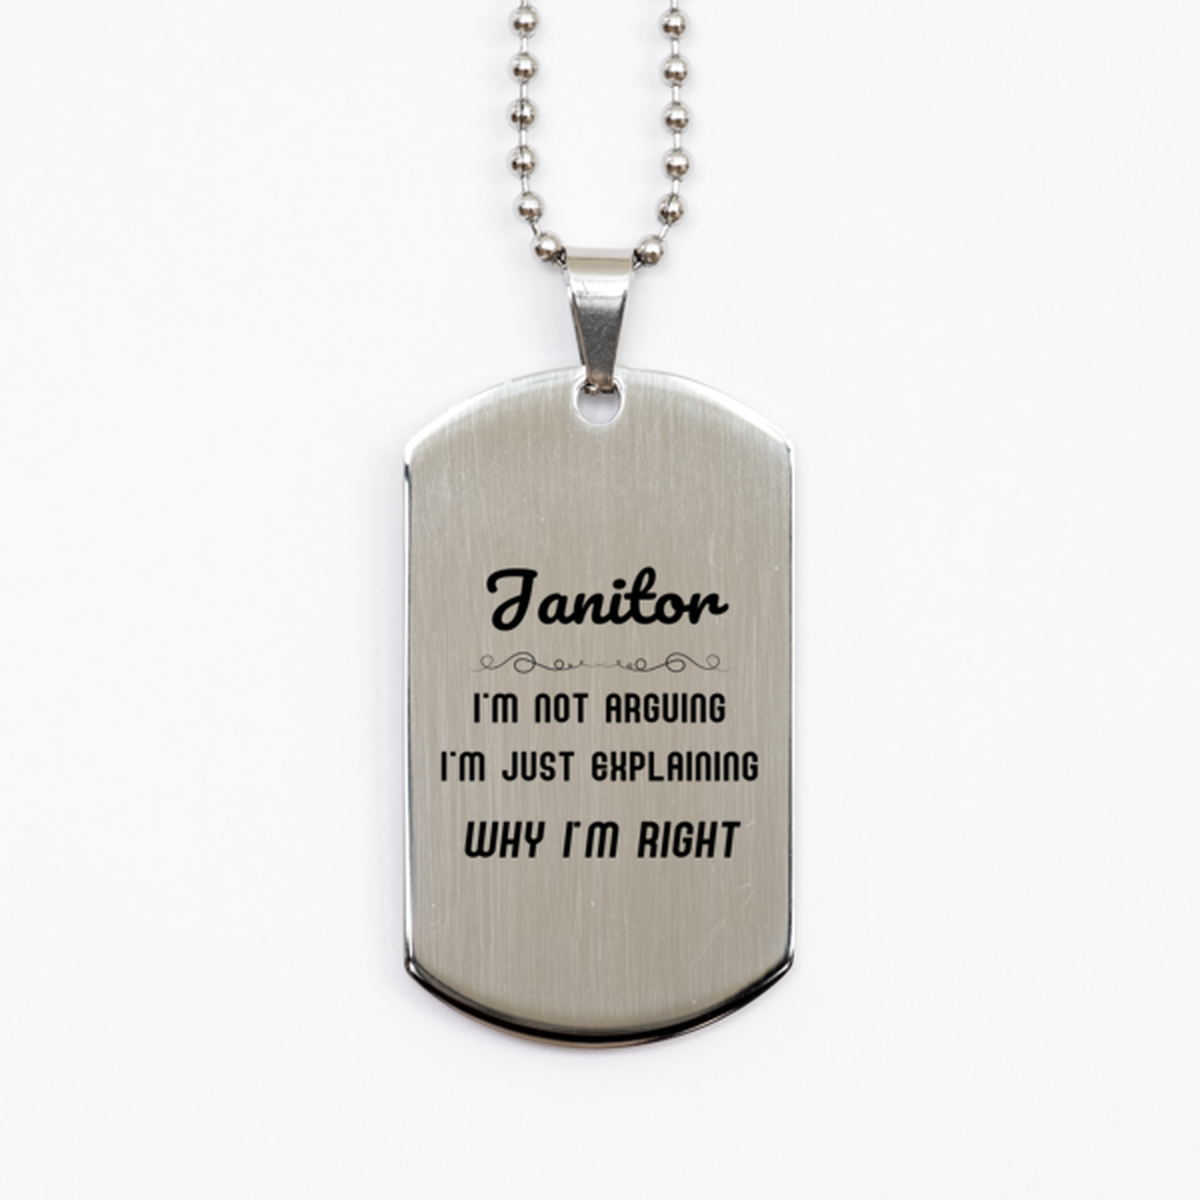 Janitor I'm not Arguing. I'm Just Explaining Why I'm RIGHT Silver Dog Tag, Funny Saying Quote Janitor Gifts For Janitor Graduation Birthday Christmas Gifts for Men Women Coworker